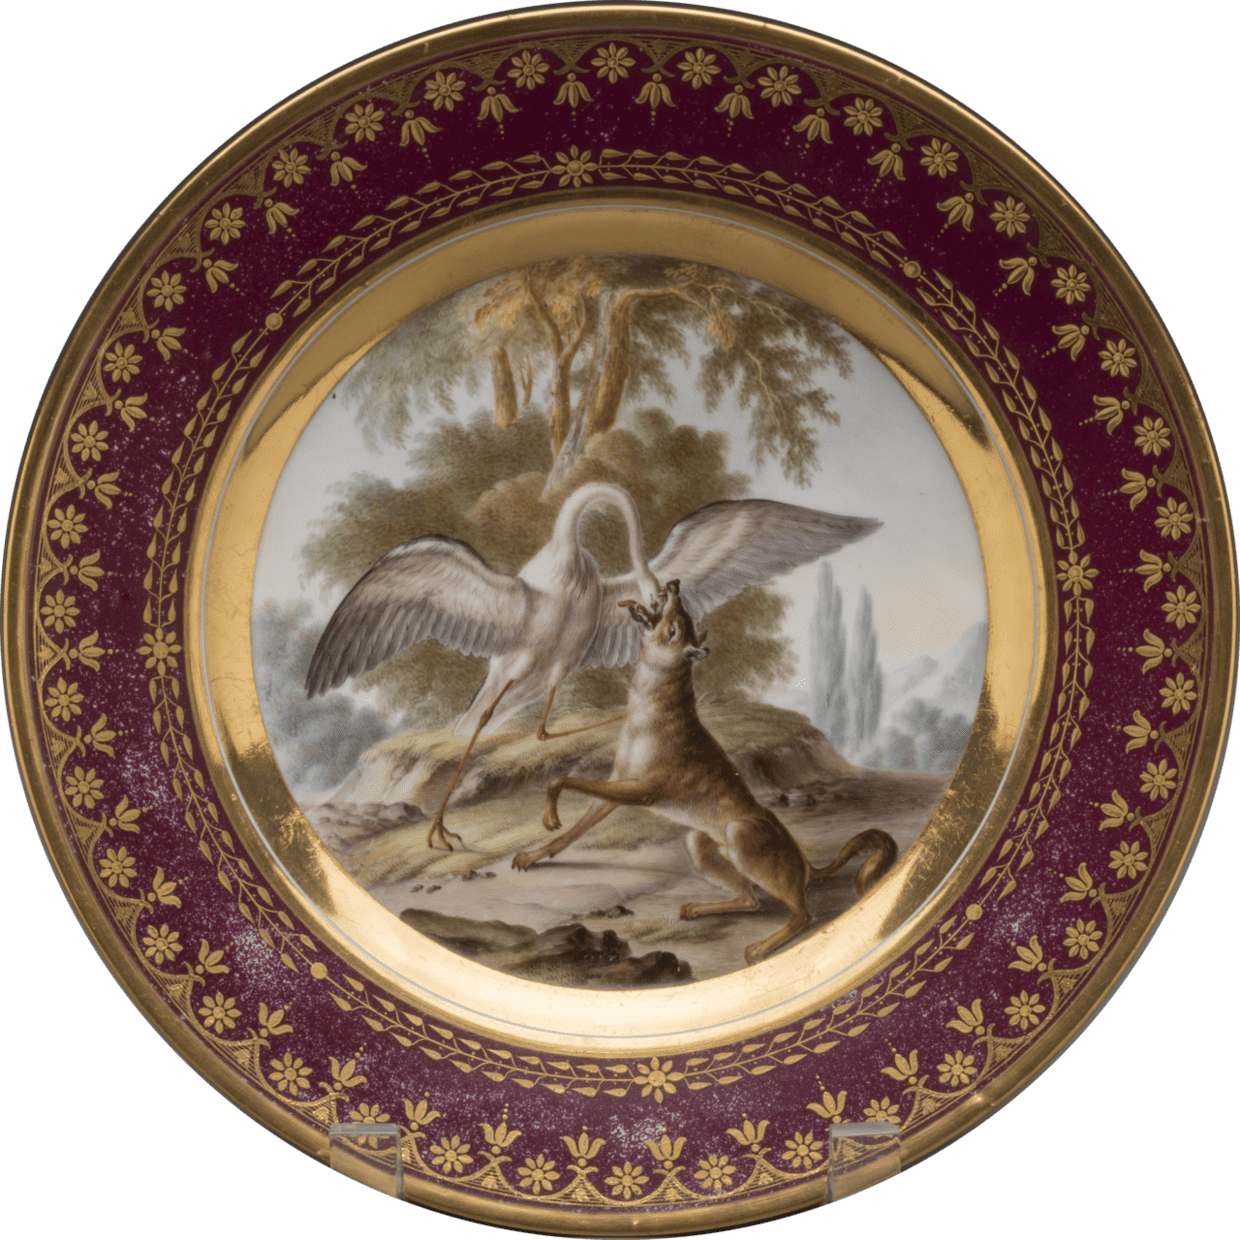 Dessert Plate with a Scene from the Fable of the Wolf and the Stork